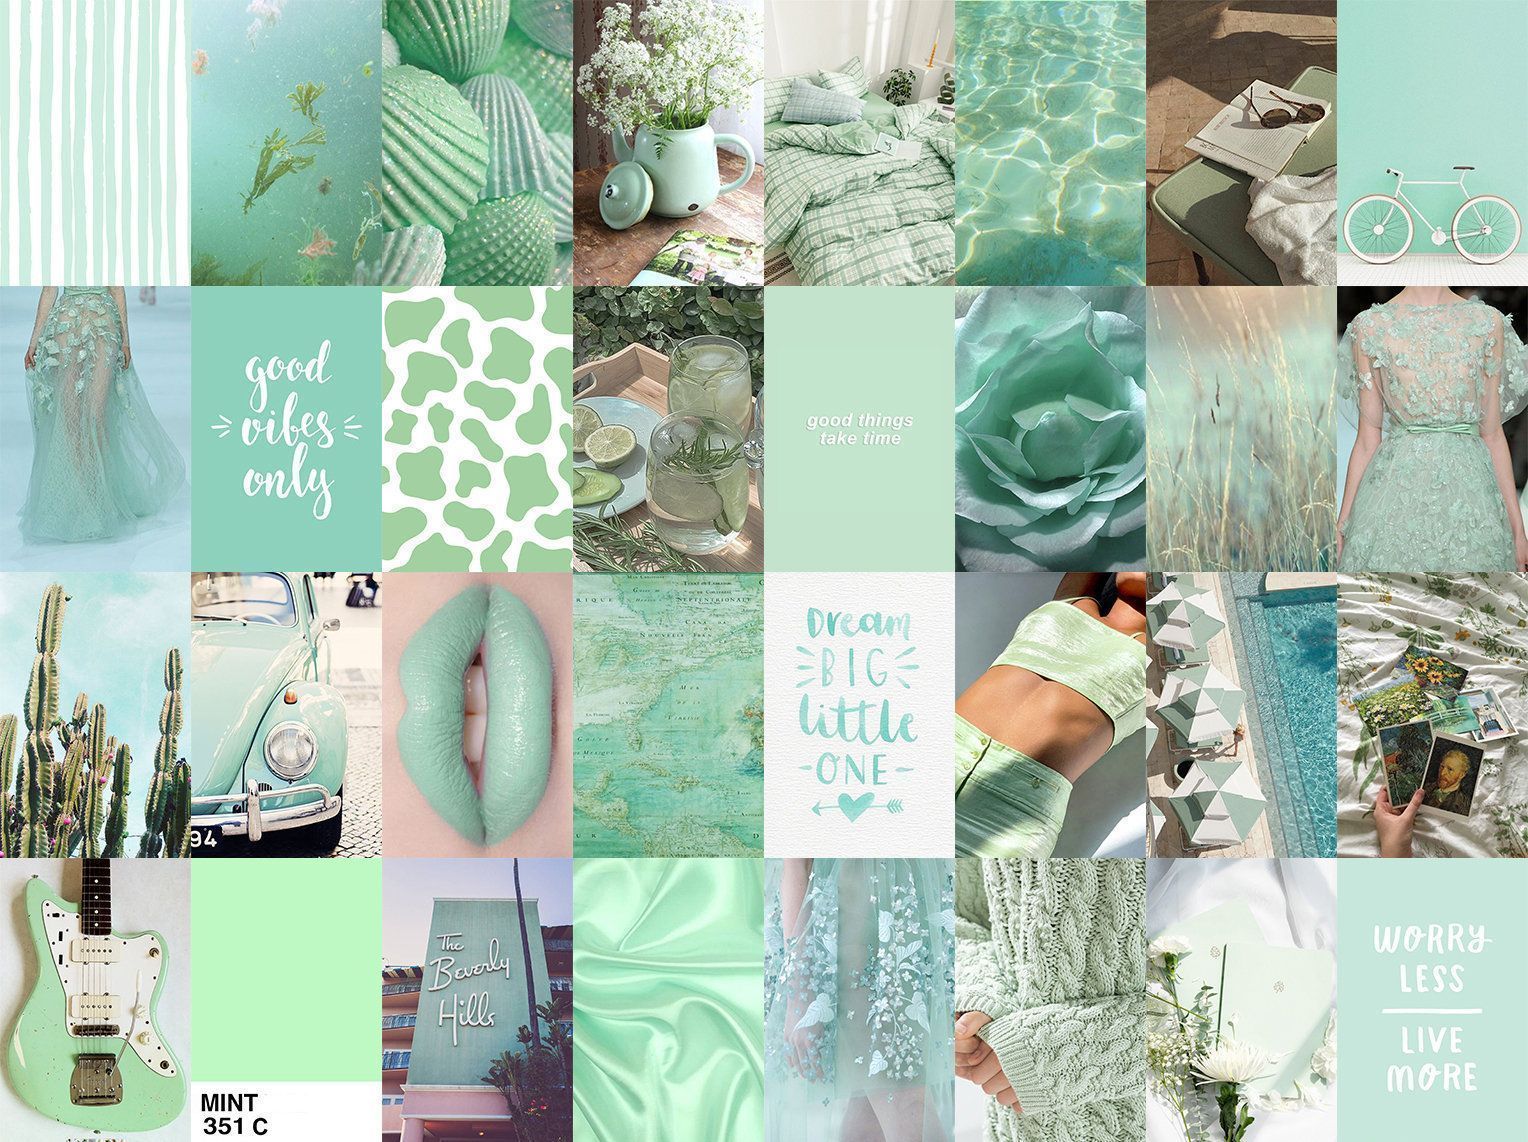 A collage of images and words in a mint green color scheme. - Mint green, pastel green